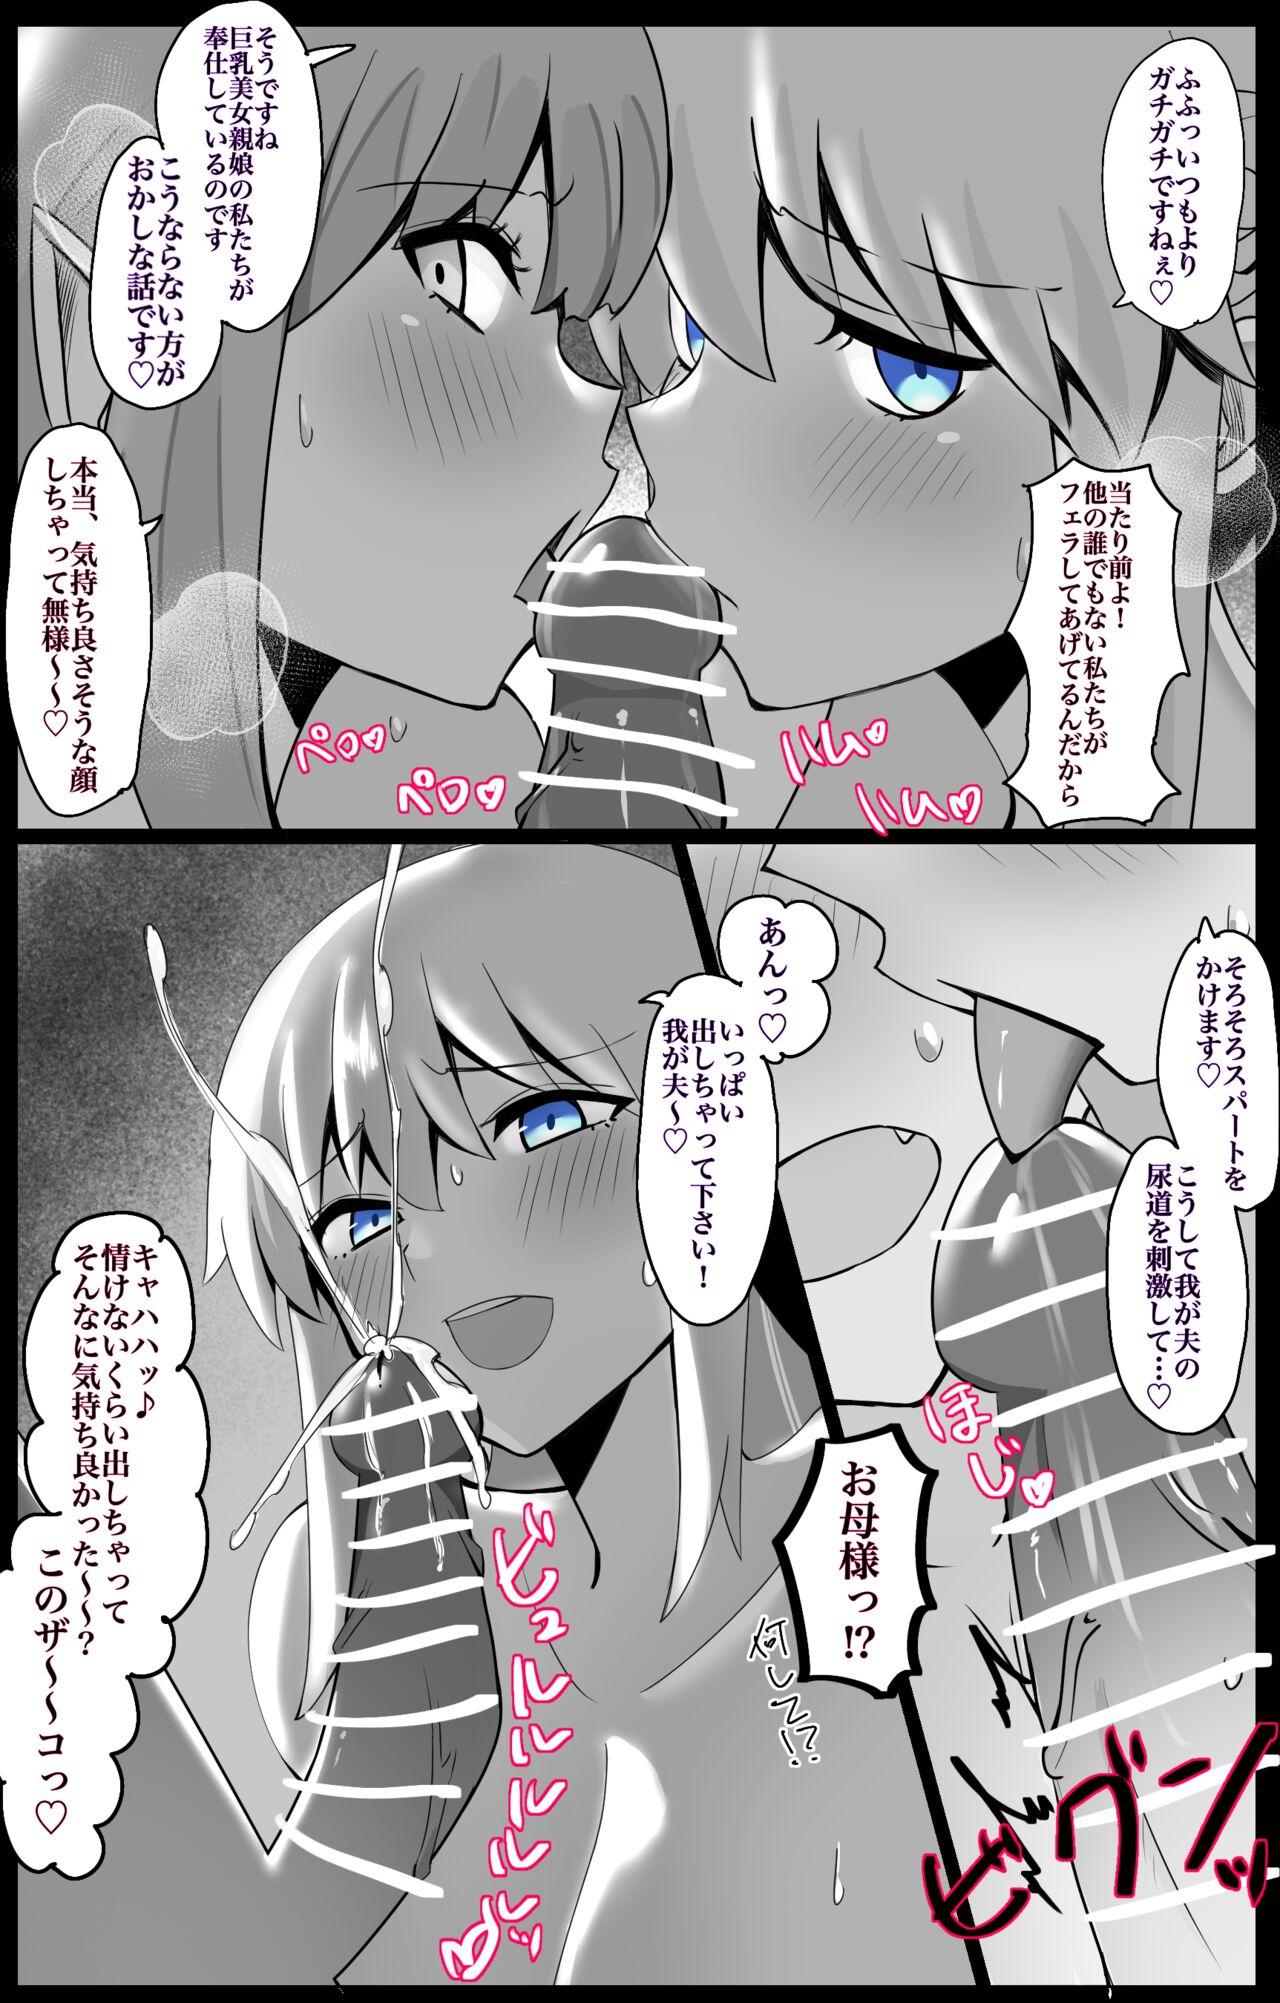 Lovers MorTri Oyakodon - Fate grand order Picked Up - Page 9